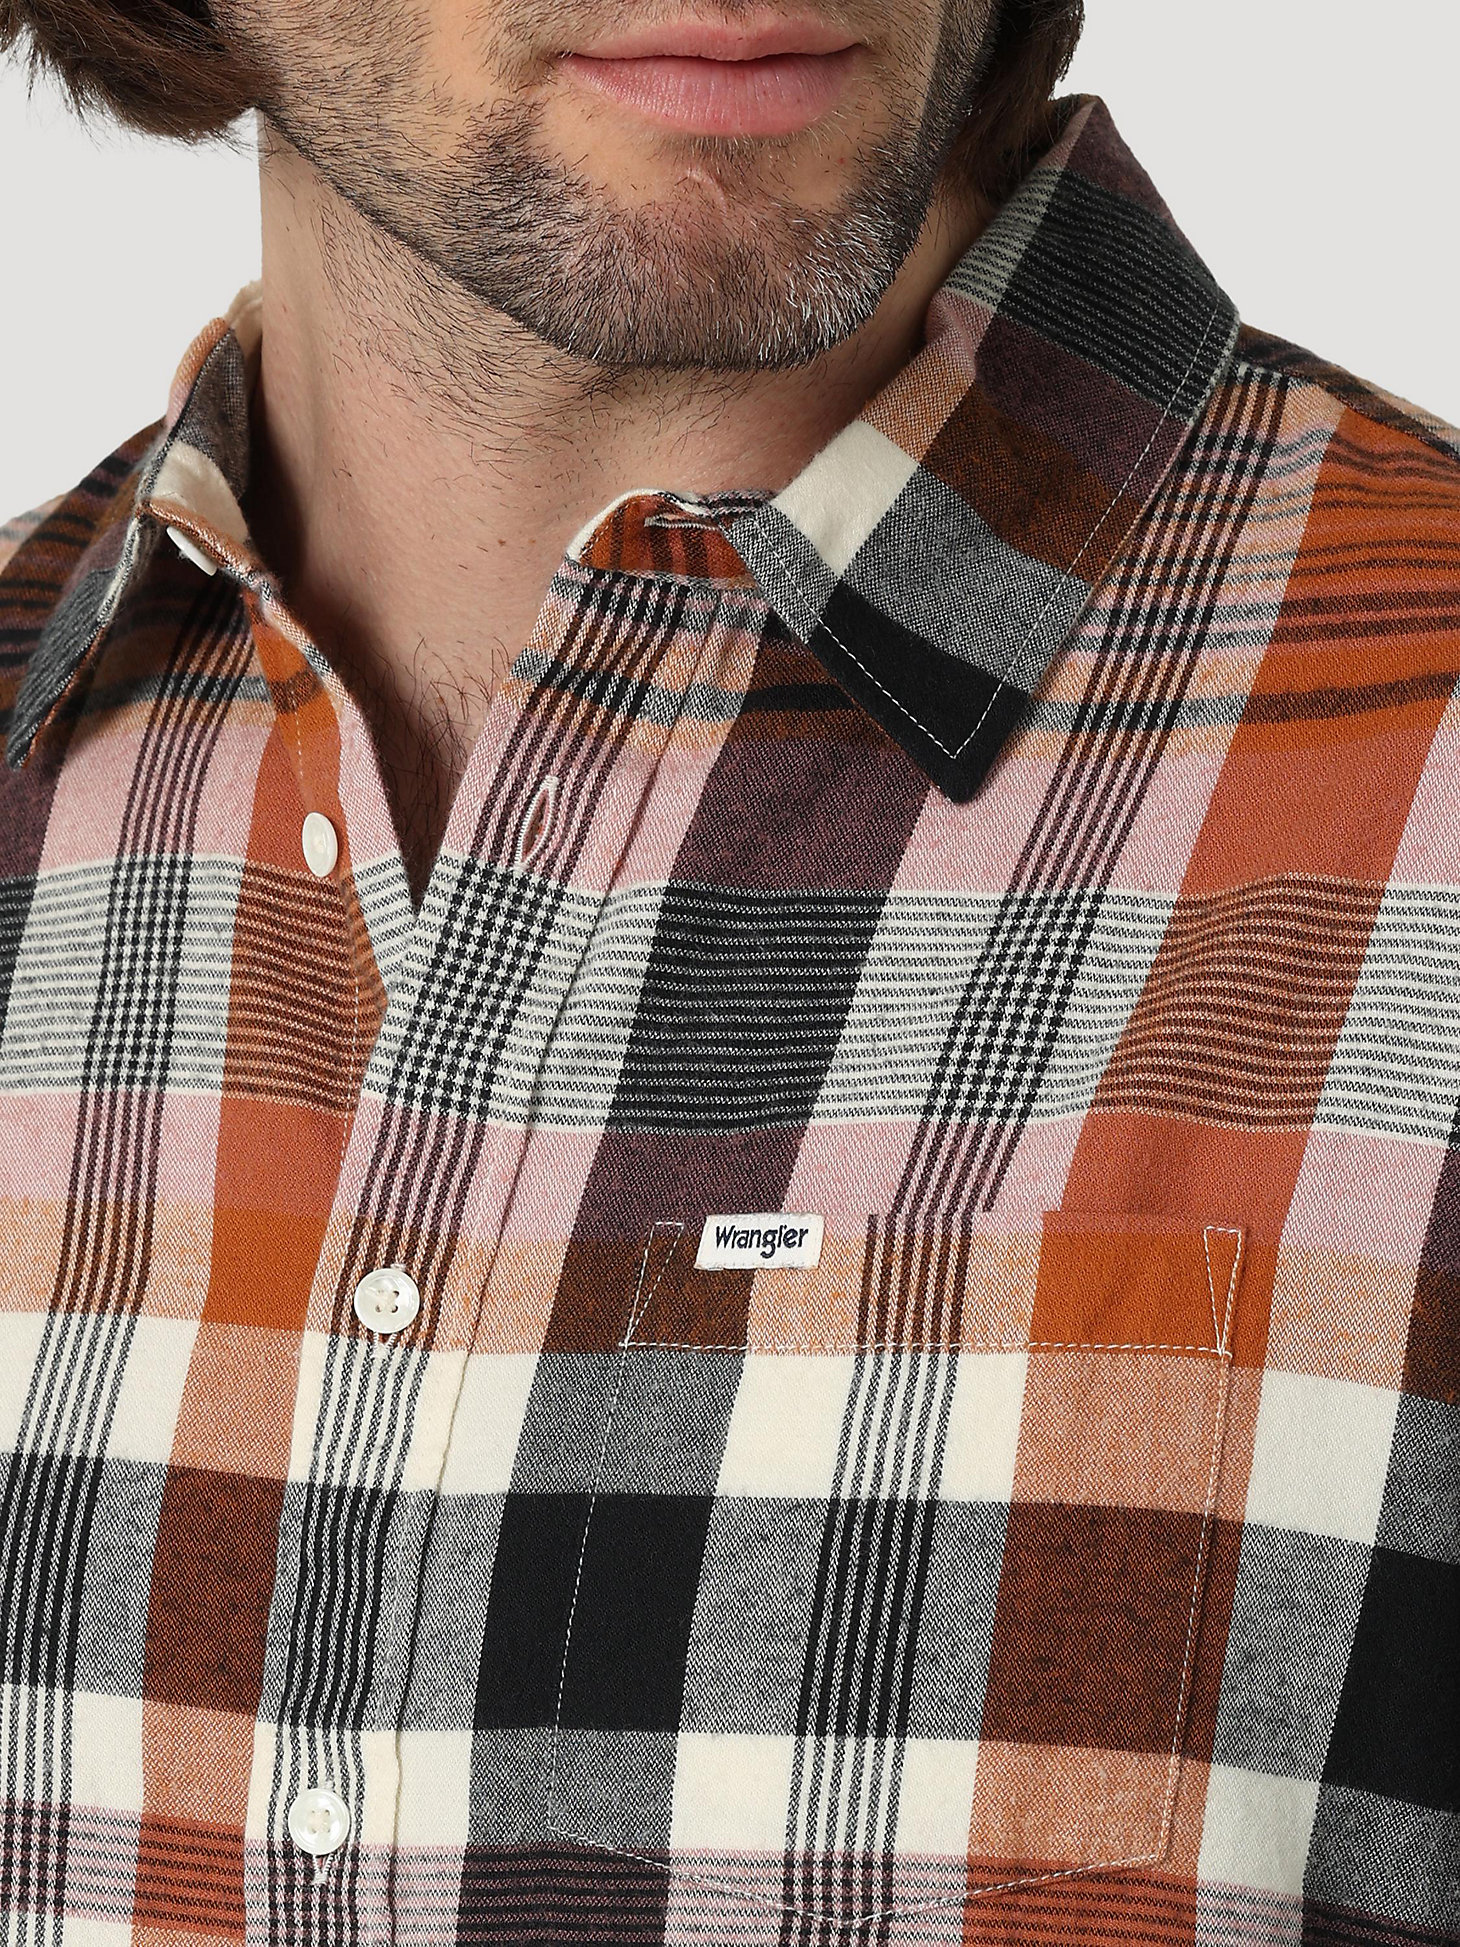 Men's Plaid Button-Up Shirt in Withered Rose alternative view 2